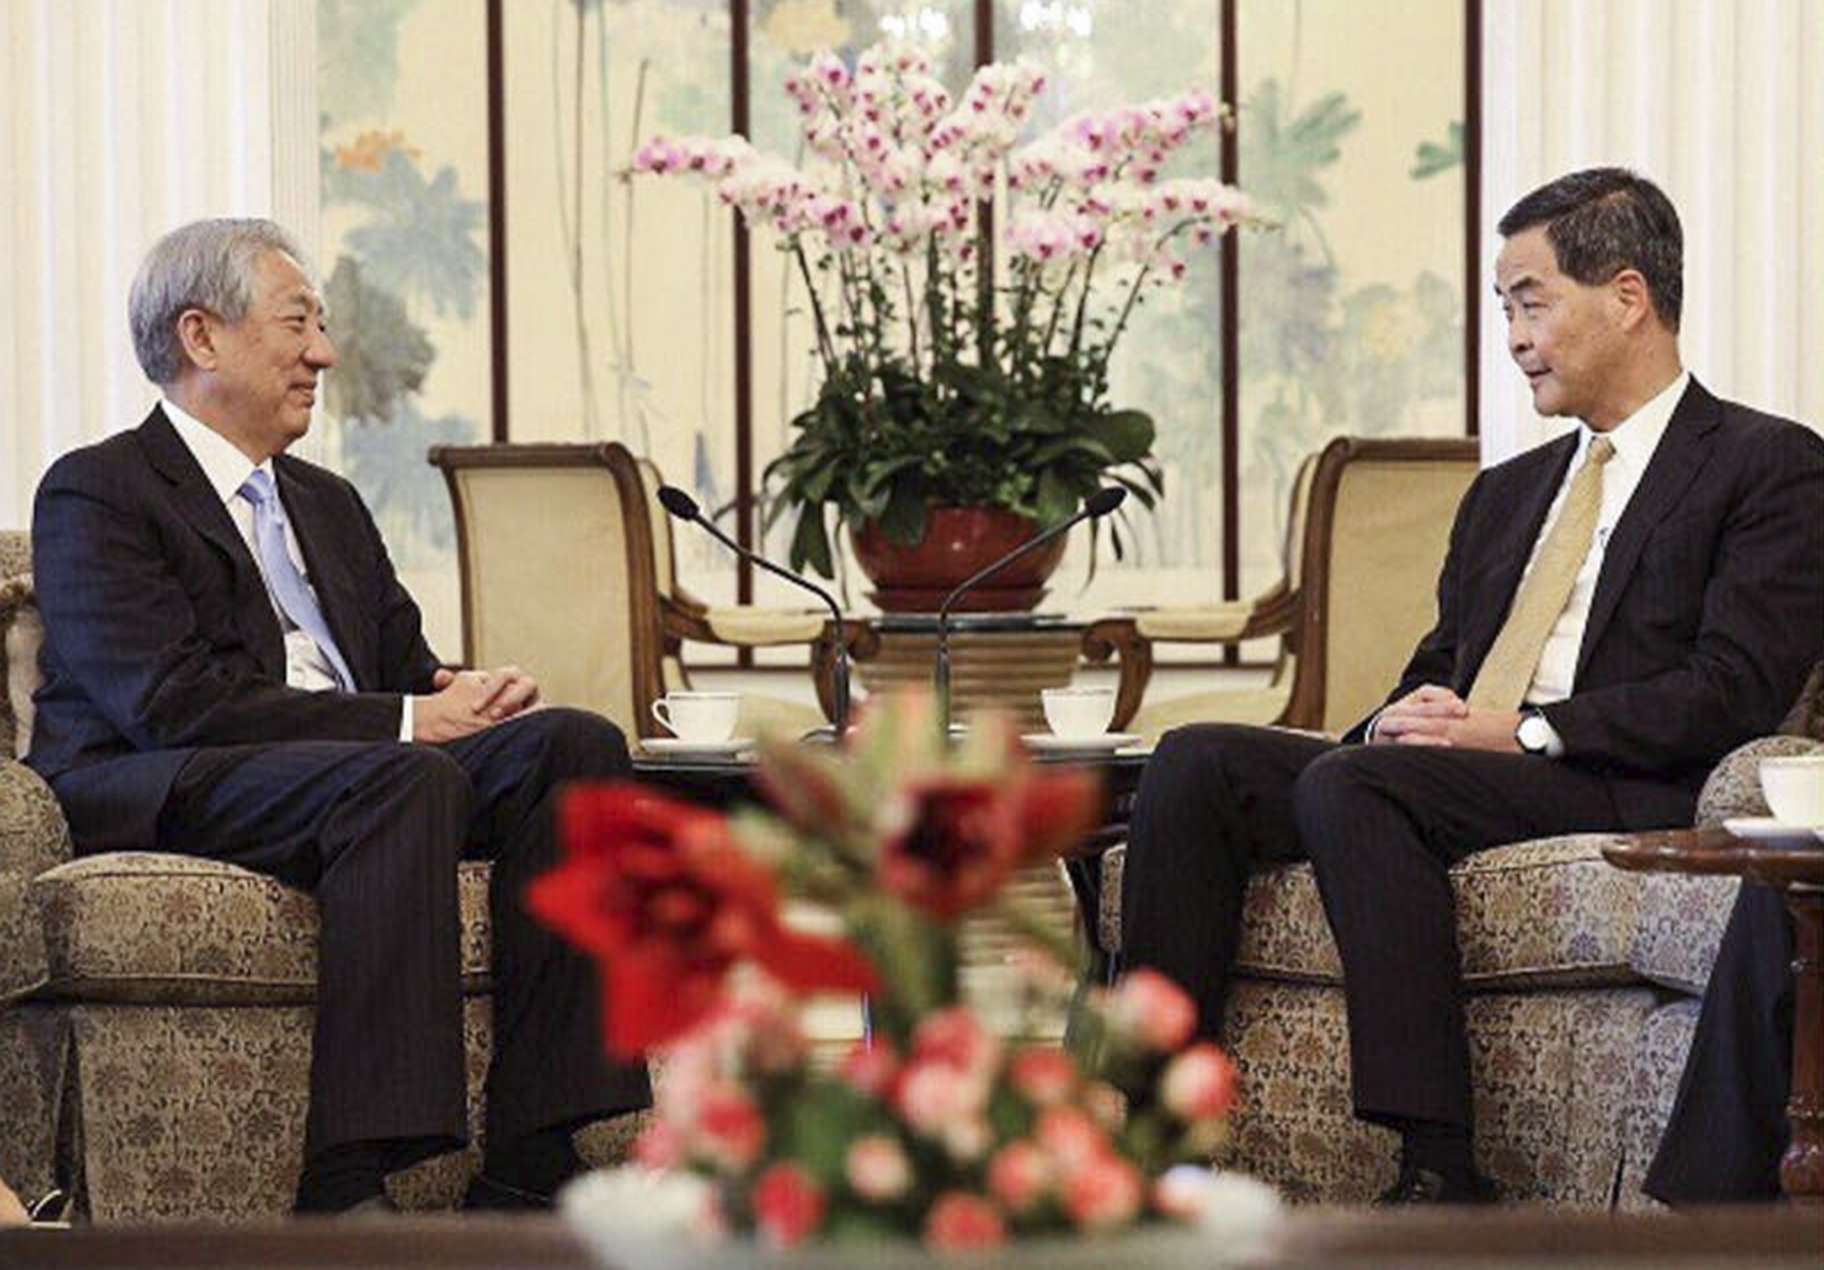 Teo Chee Hean meets Leung Chung-ying in Hong Kong during his two-day visit. Photo: Facebook